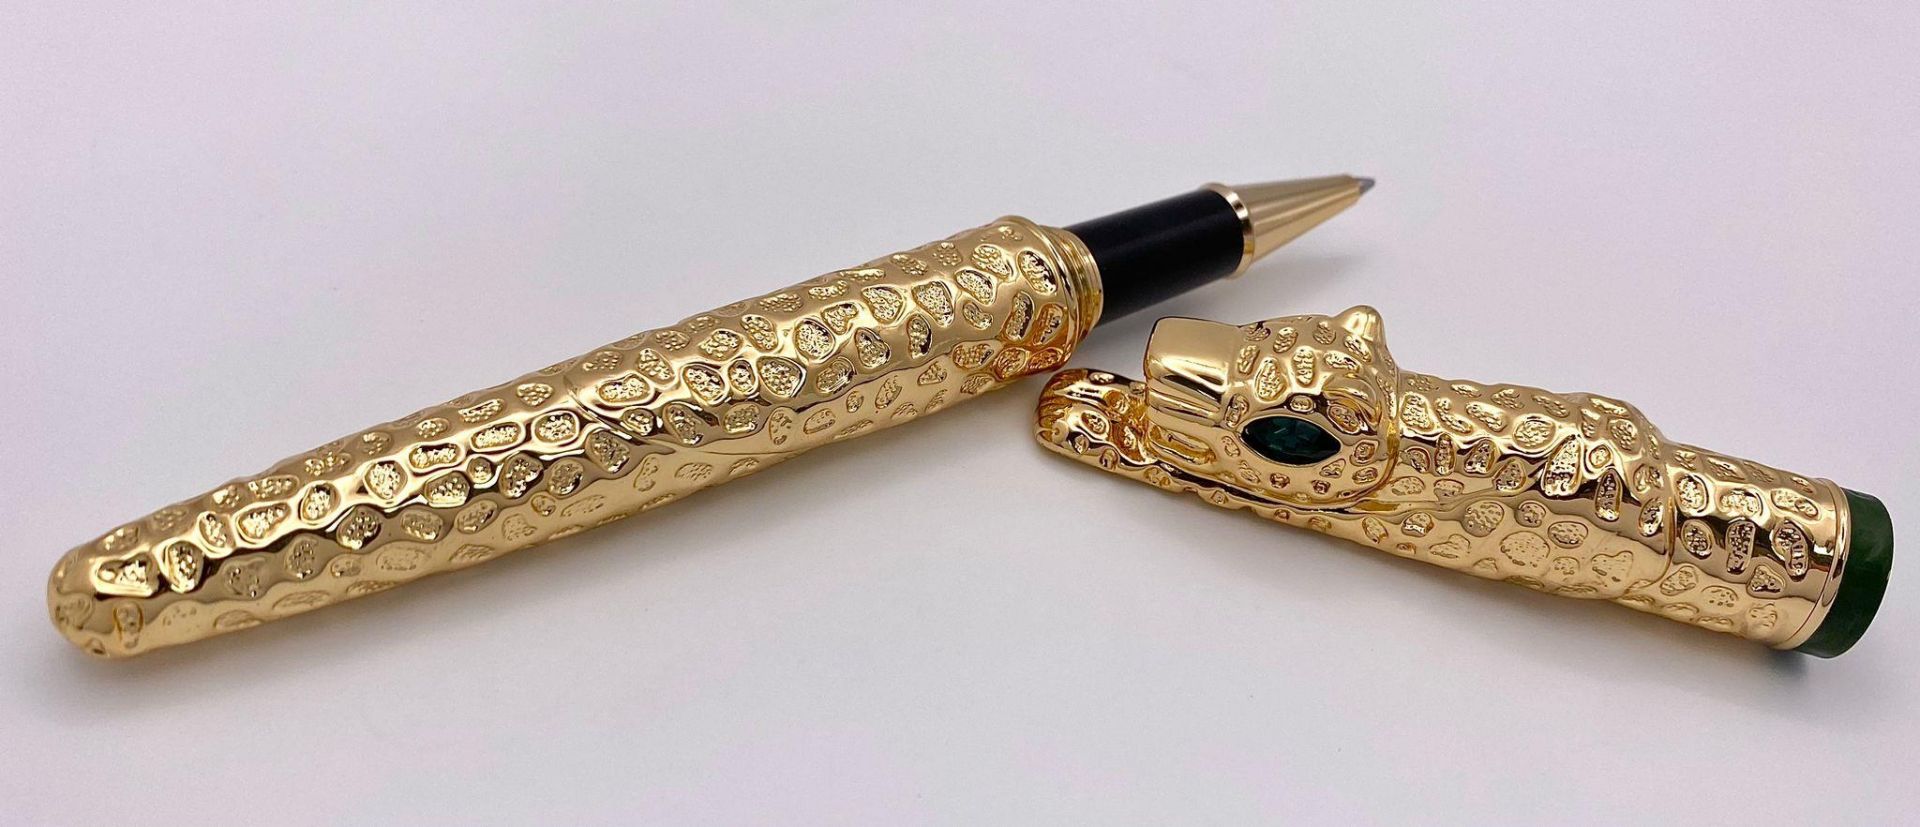 A very substantial, designer style, pen in the shape of a panther with emerald-green eyes, in a